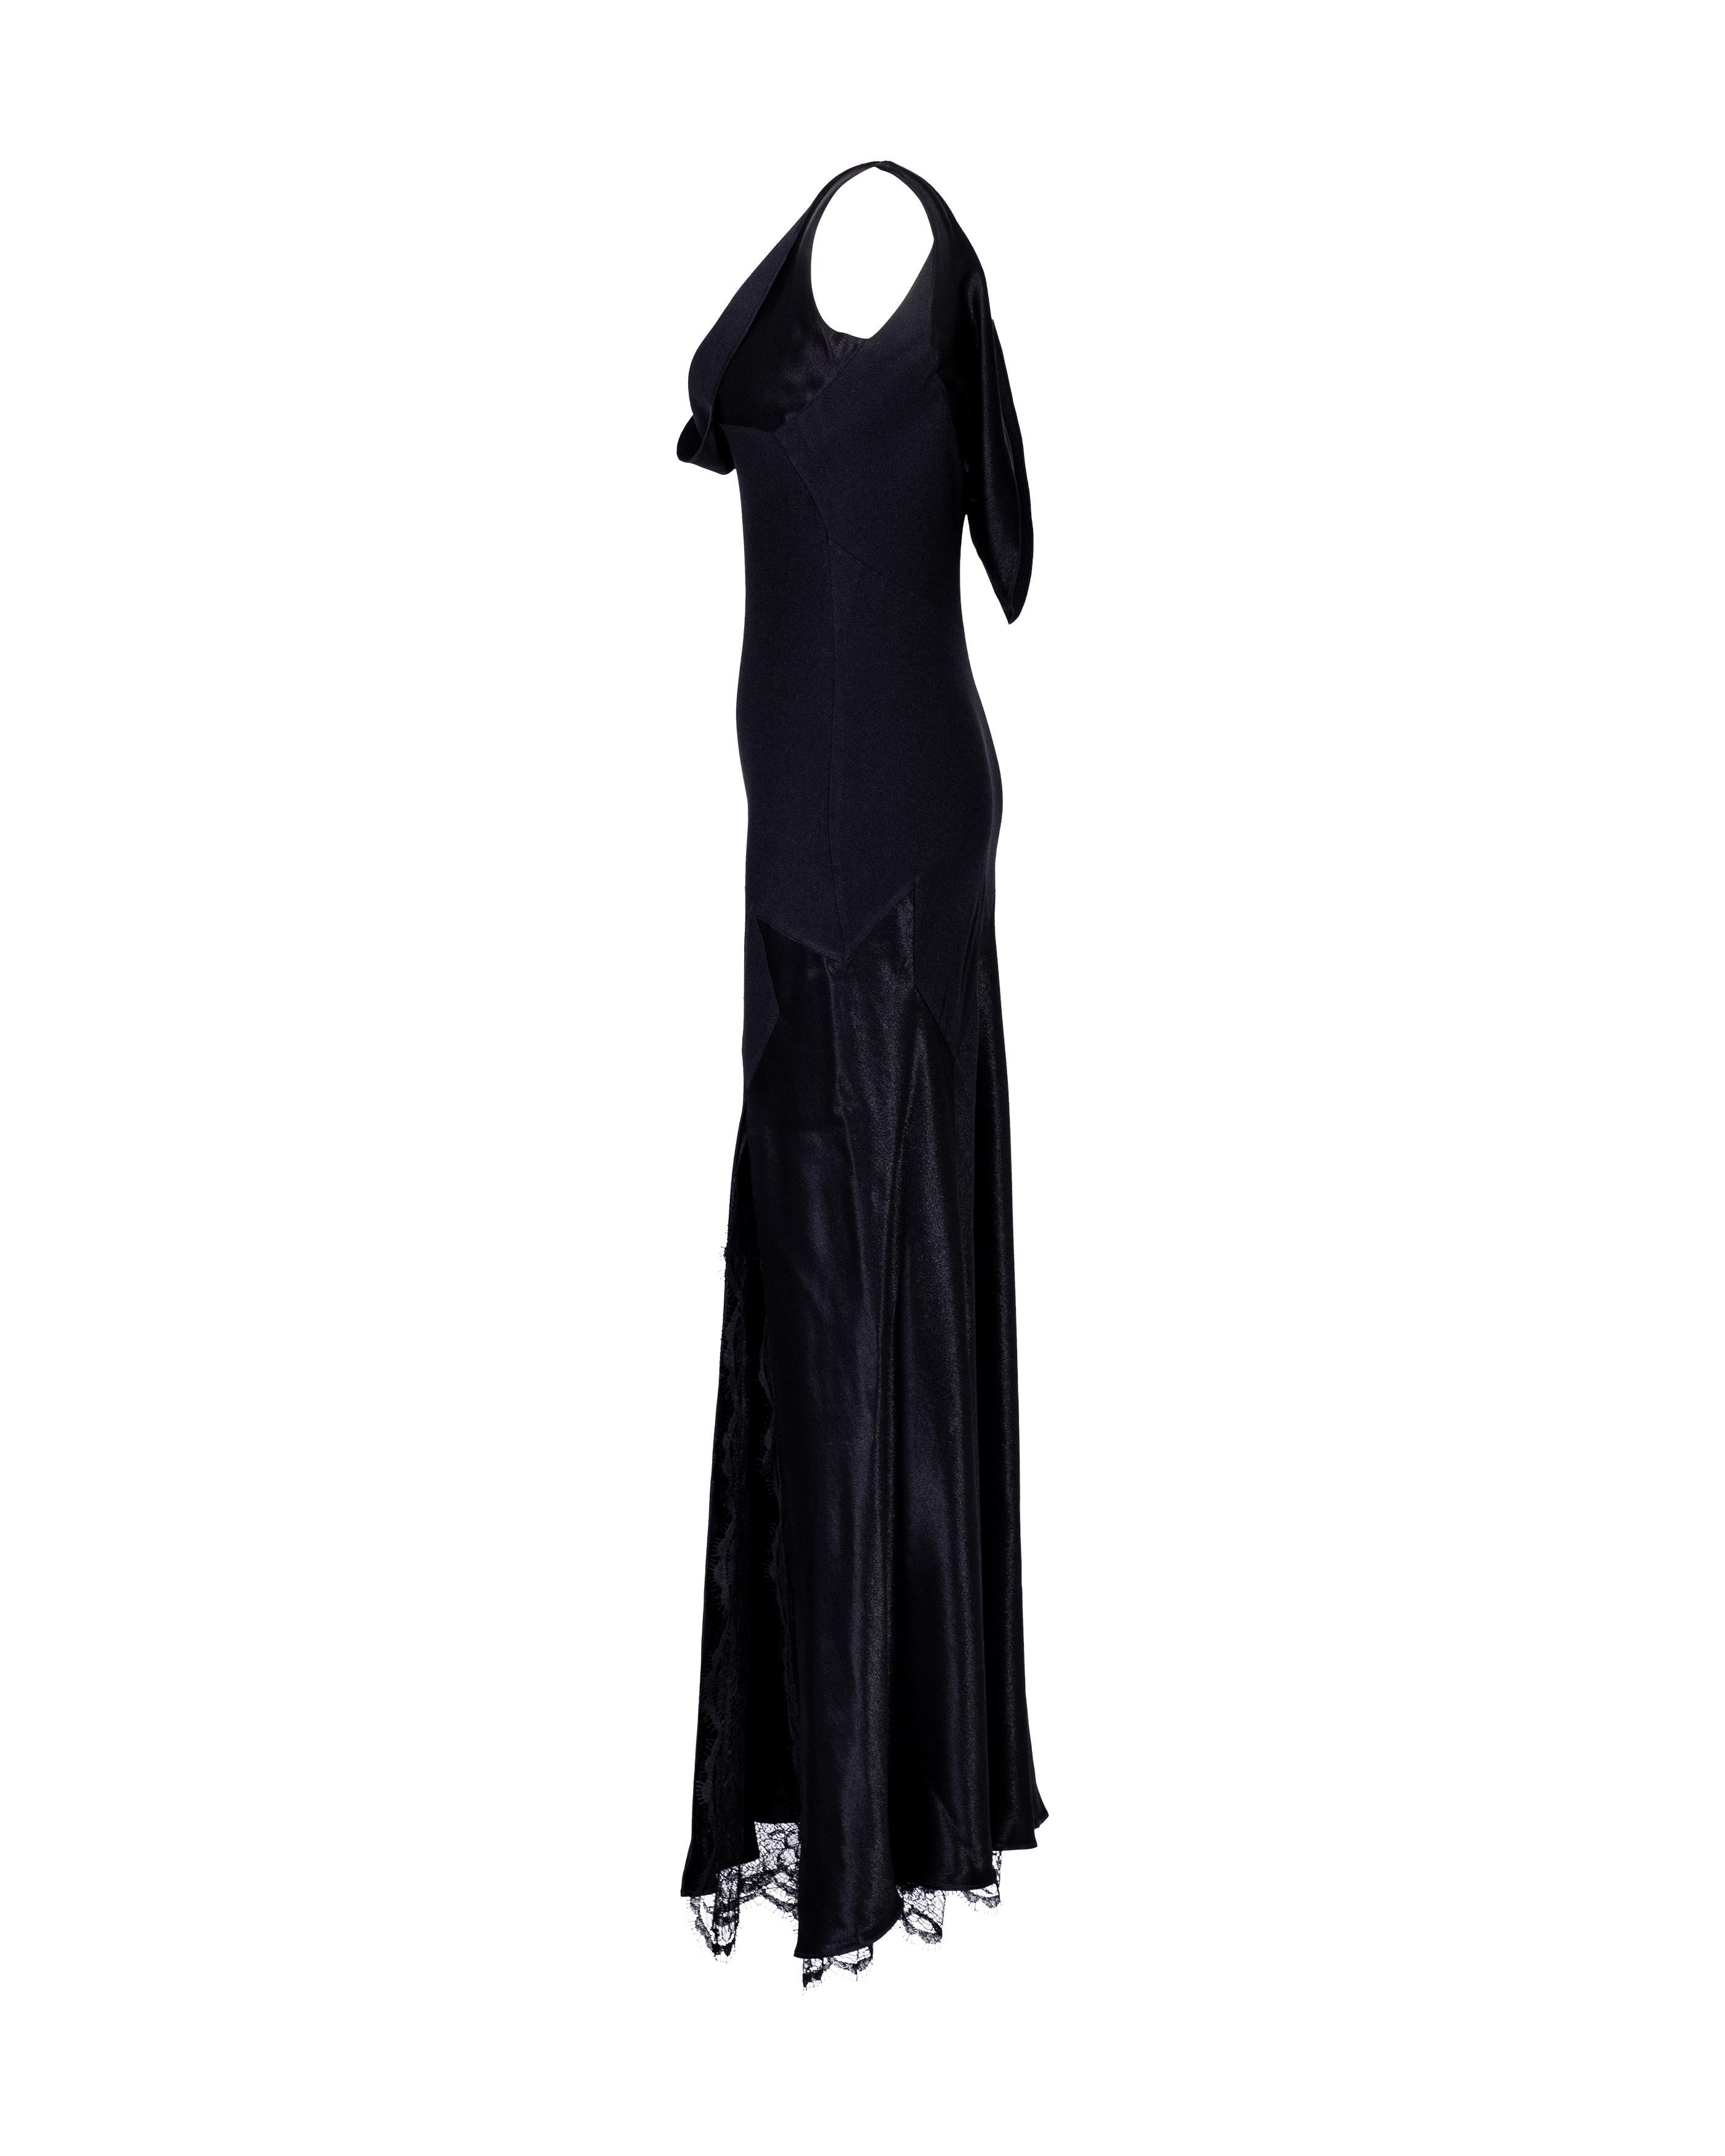 Women's S/S 1995 John Galliano Black Bias Cut Gown with Lace Front Slit